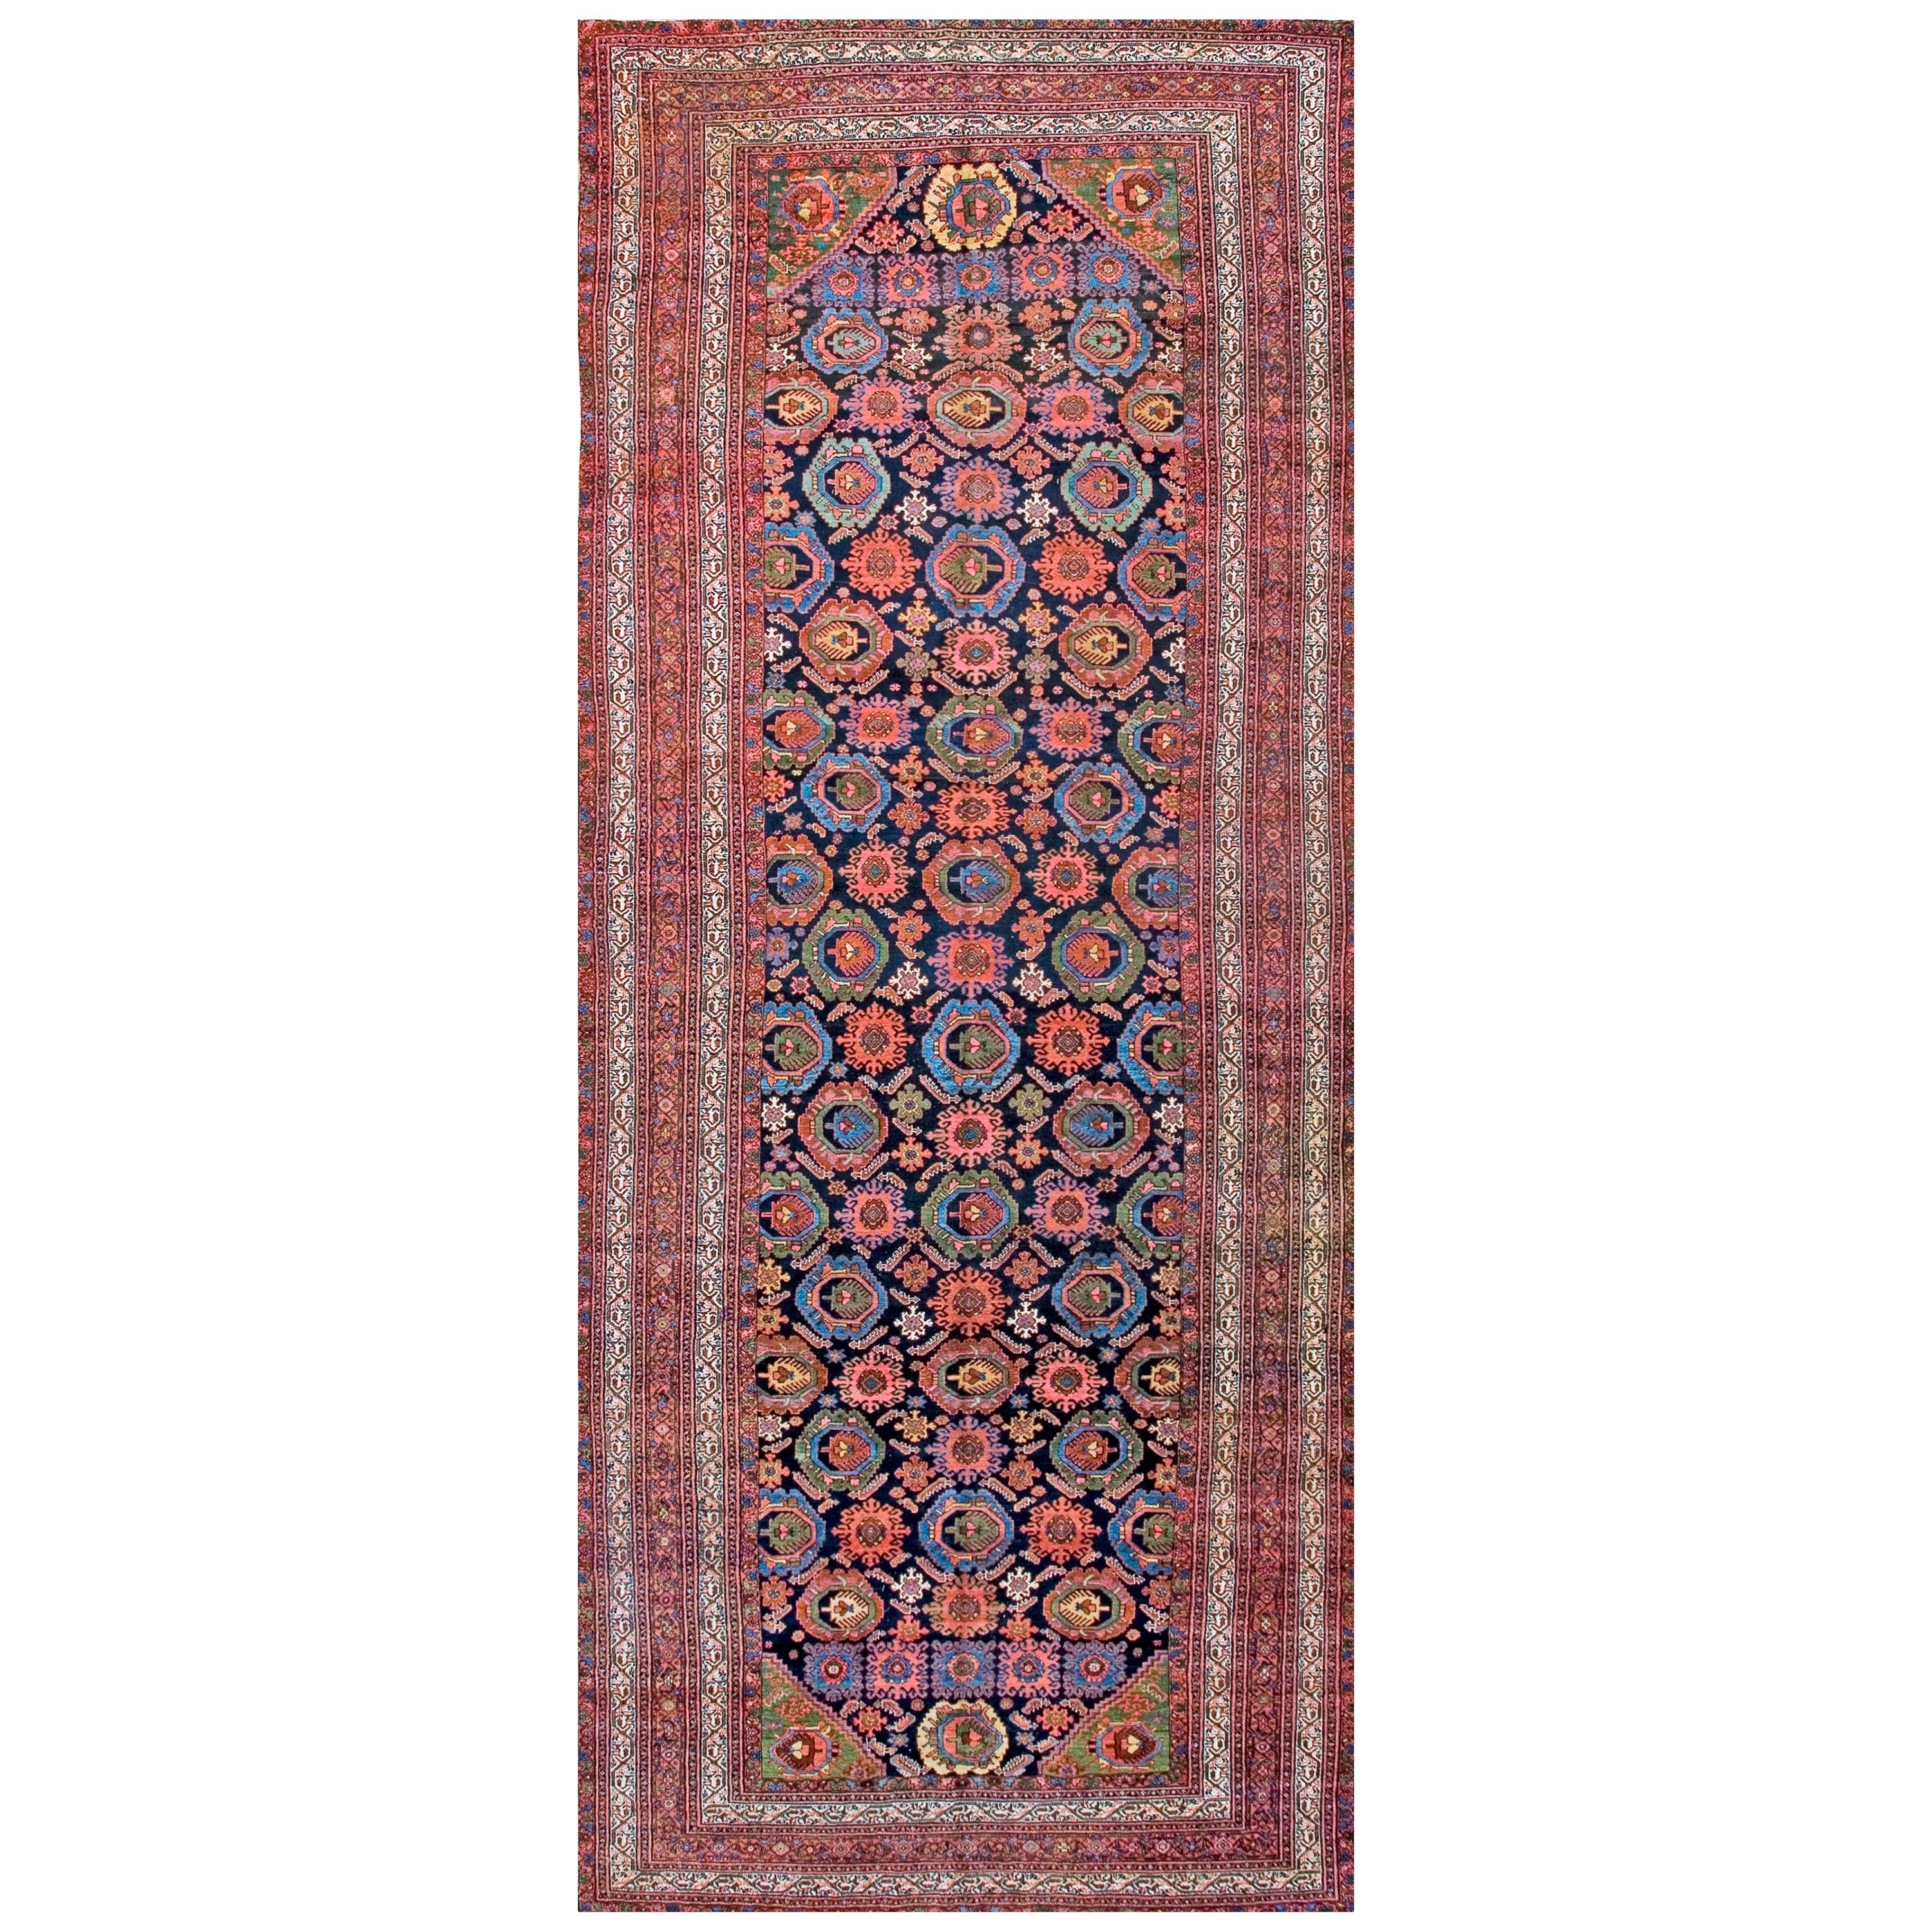 Early 20th Century Persian Malayer Gallery Carpet ( 7'3" x 17'10" - 221 x 544 ) For Sale